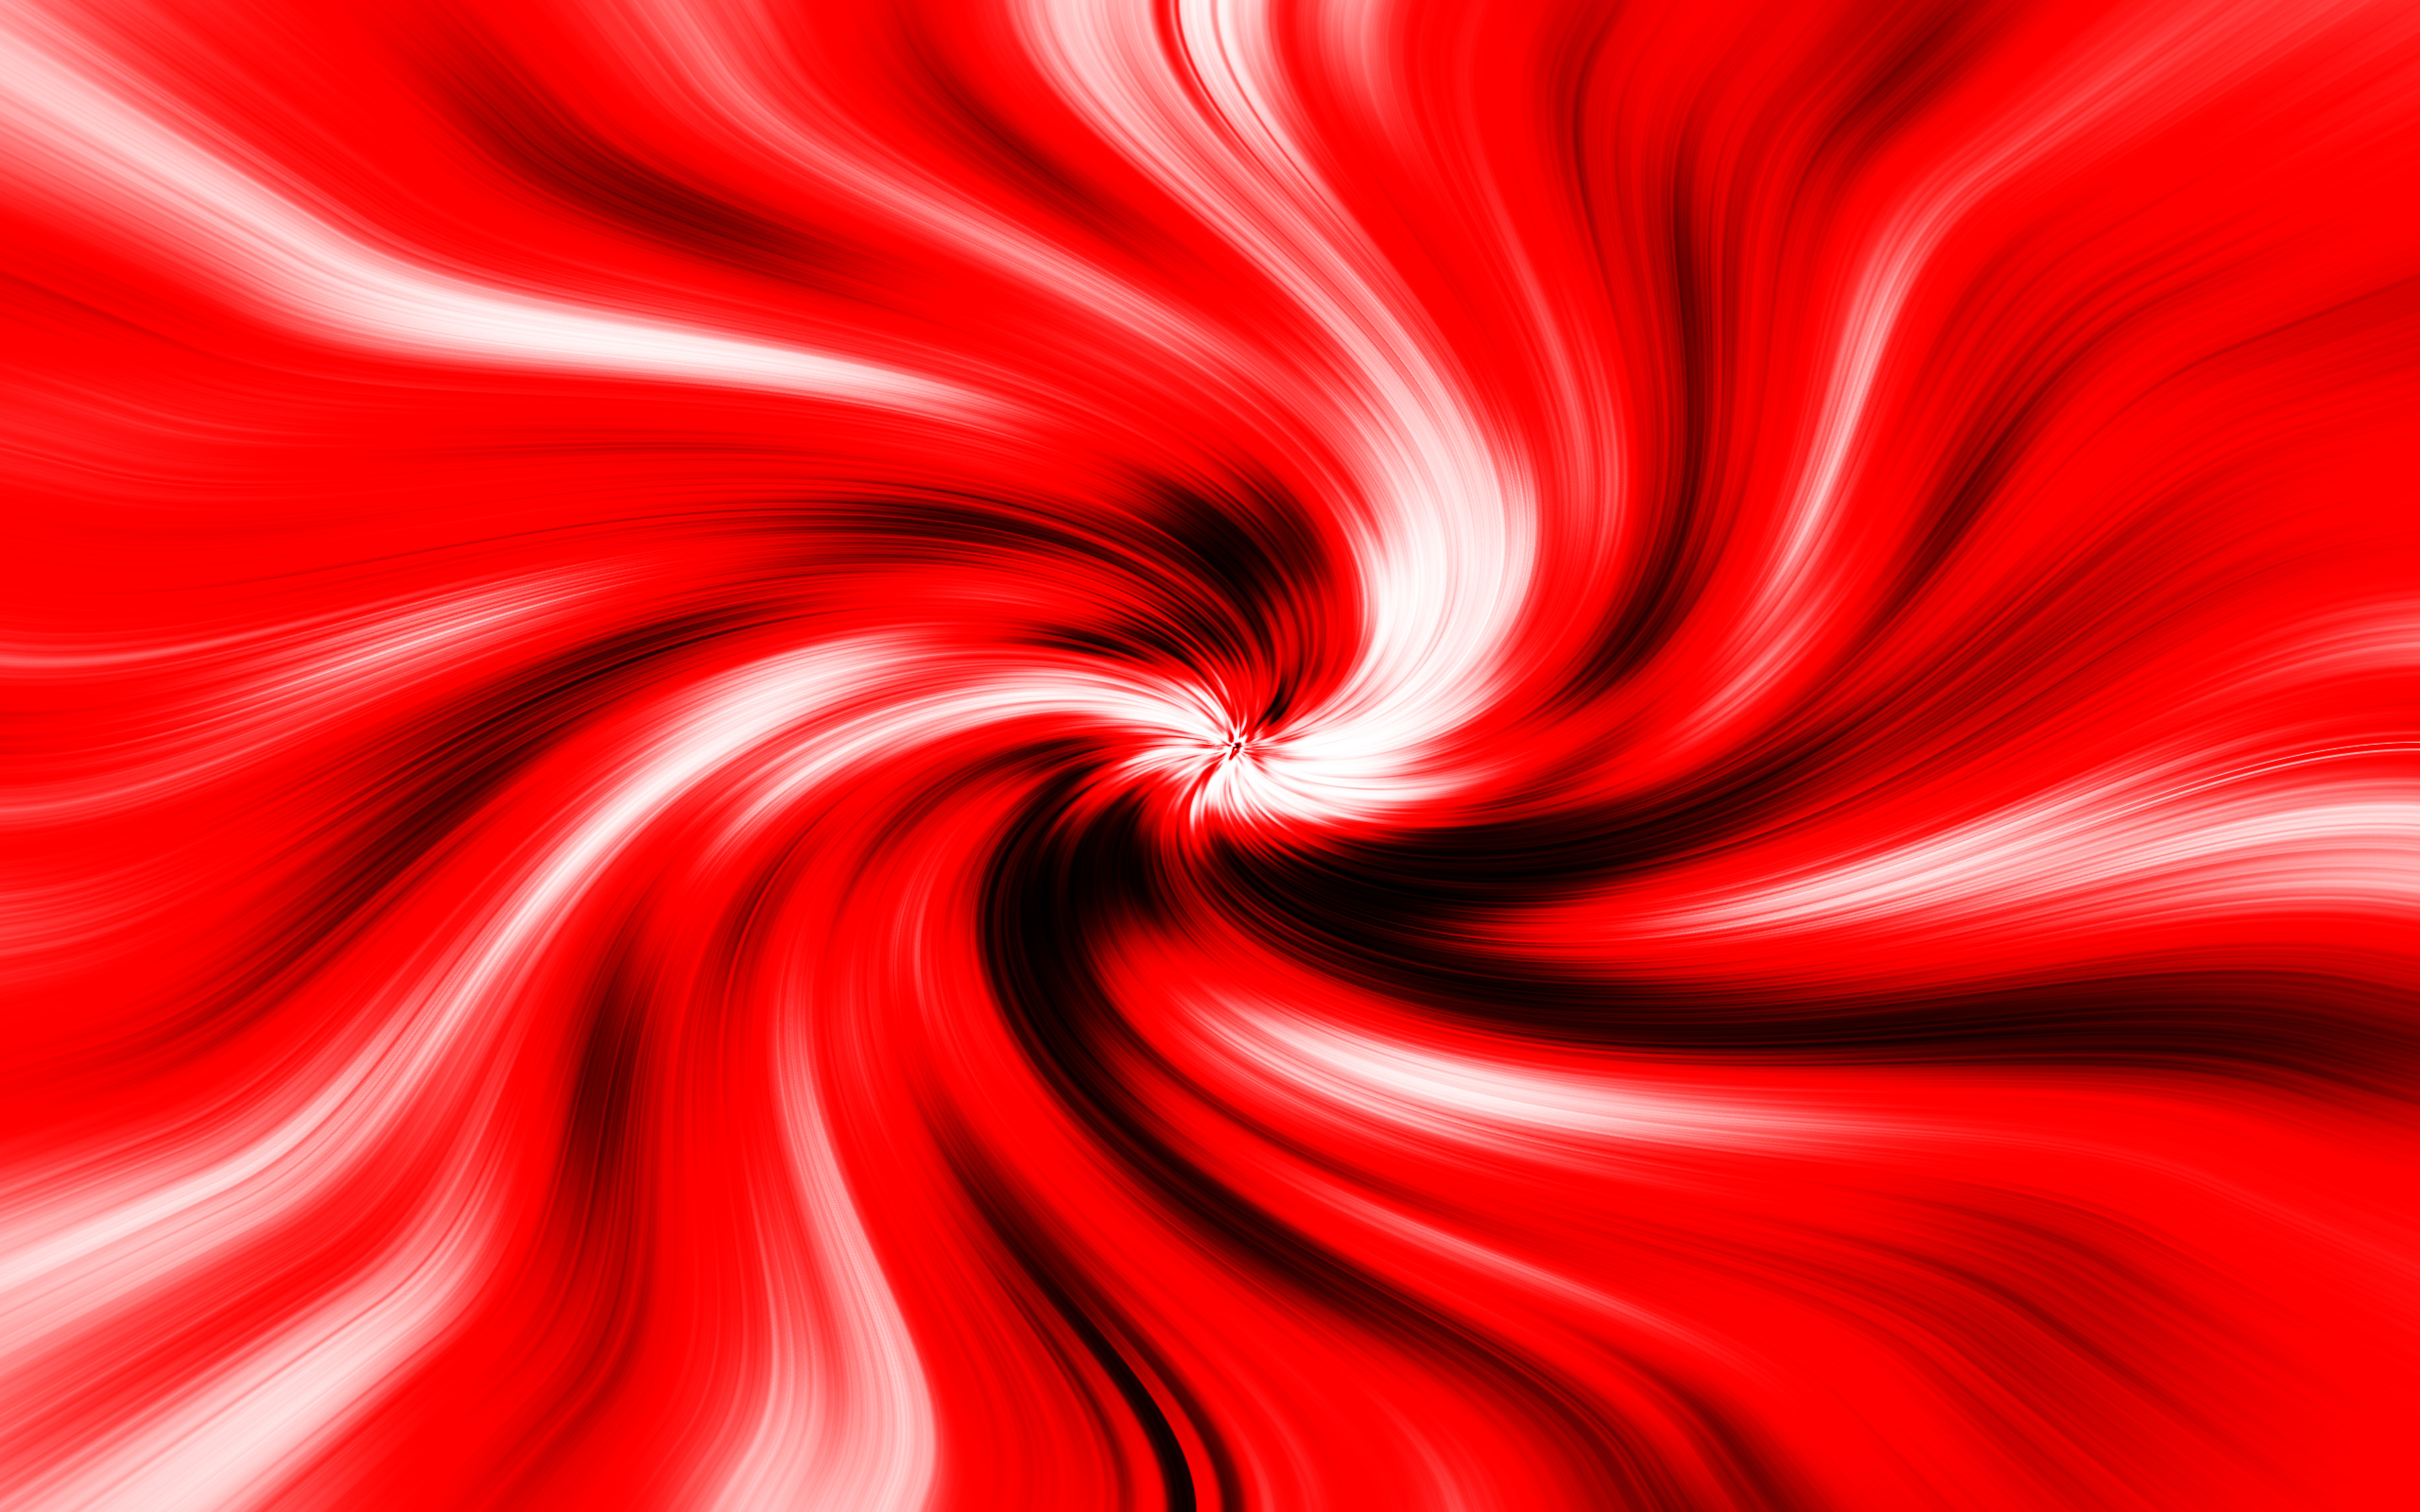 Wallpaper Swirl Red And Black